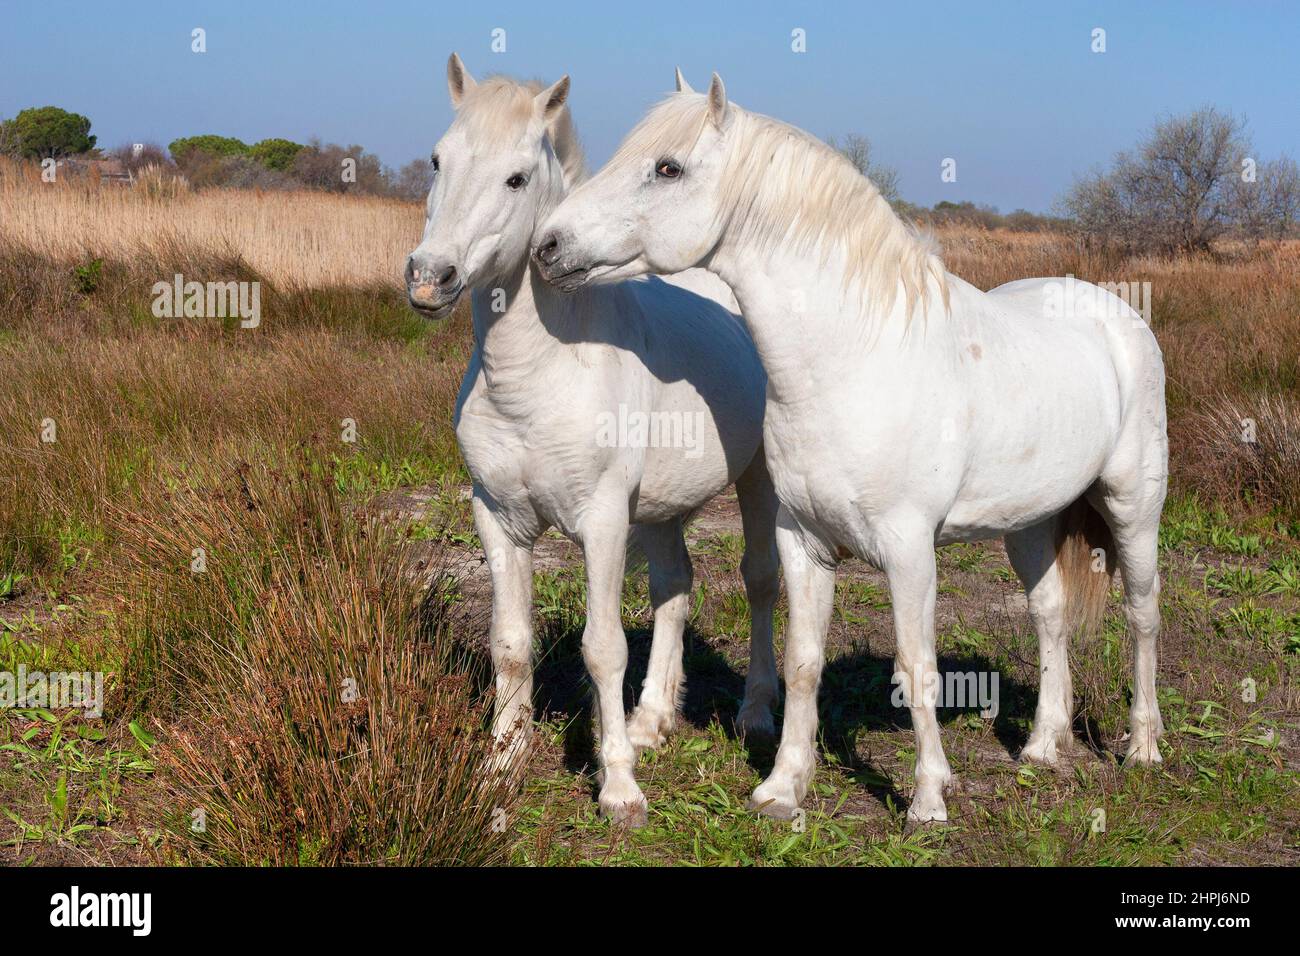 Two camargue horses, stallions in the salt marshes of the Camargue delta of southern France Stock Photo